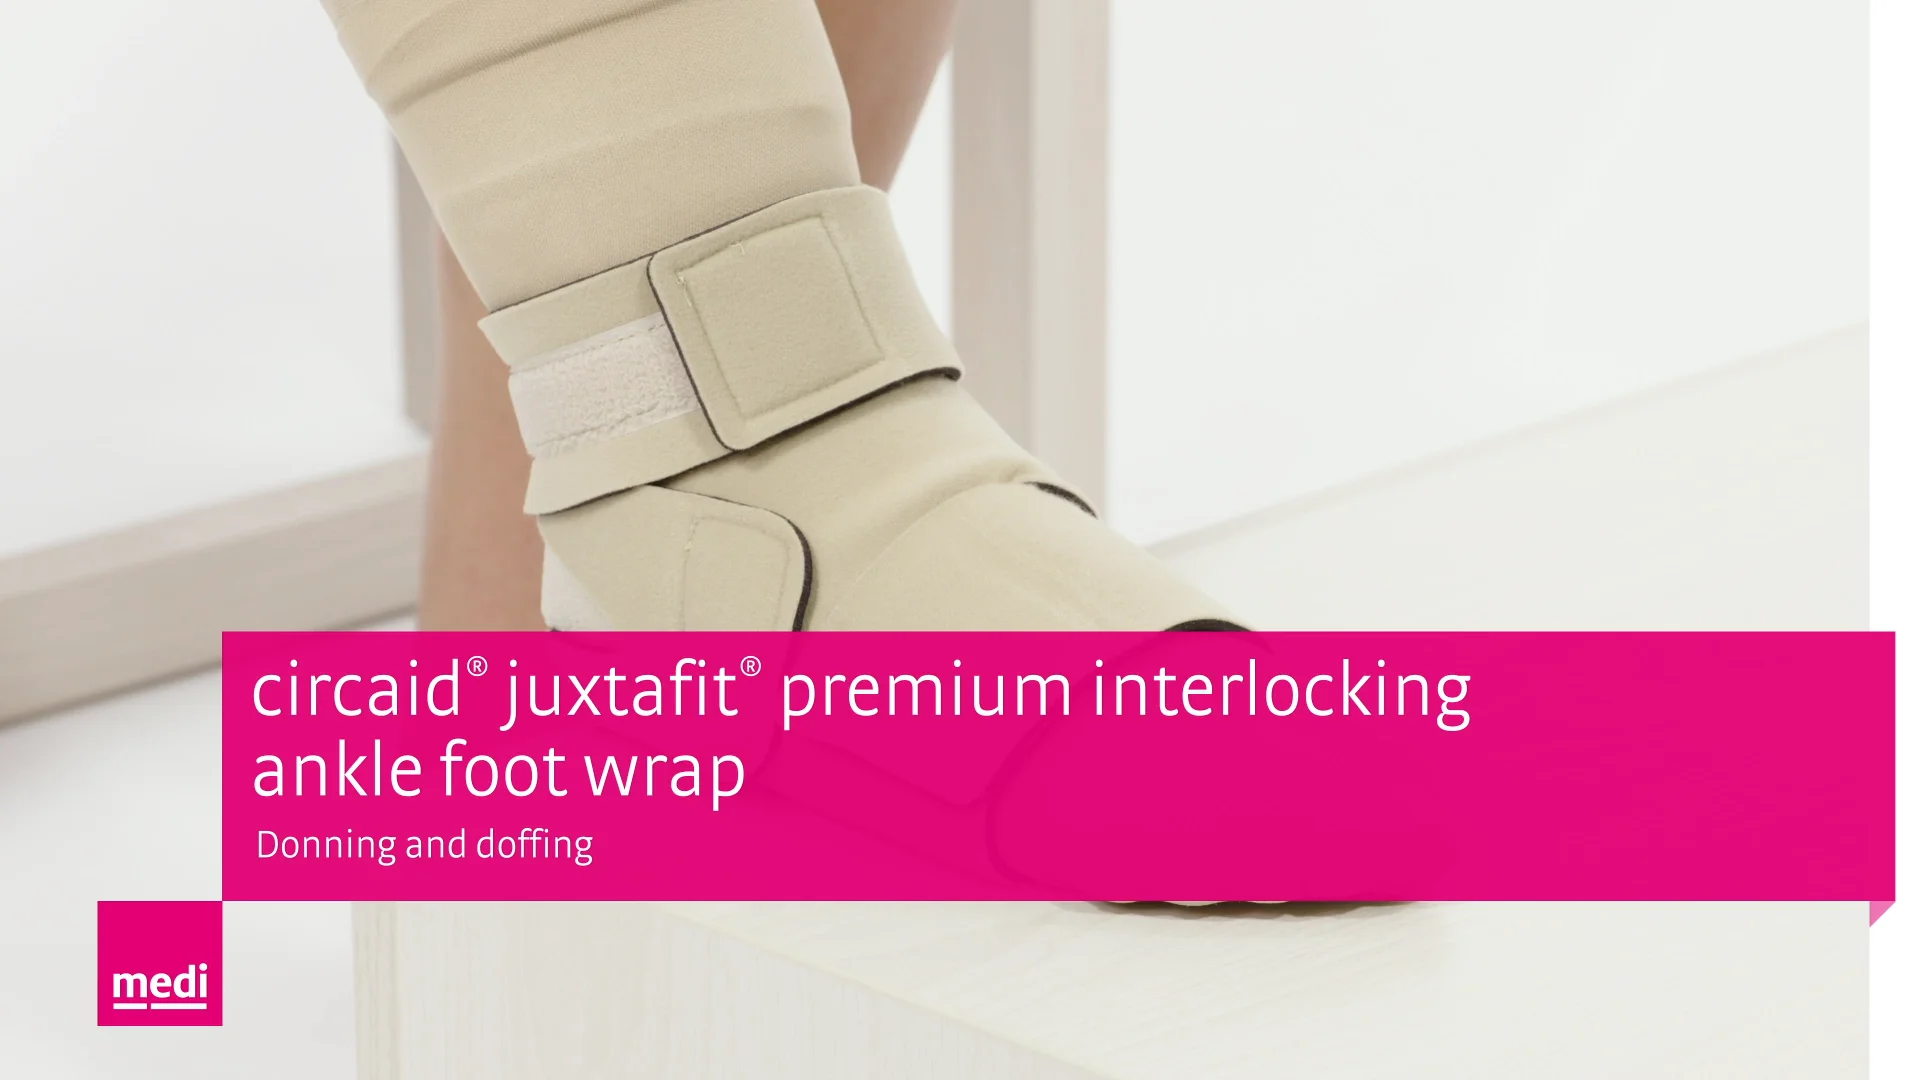 How to apply the circaid juxtalite ankle foot wrap (afw) 